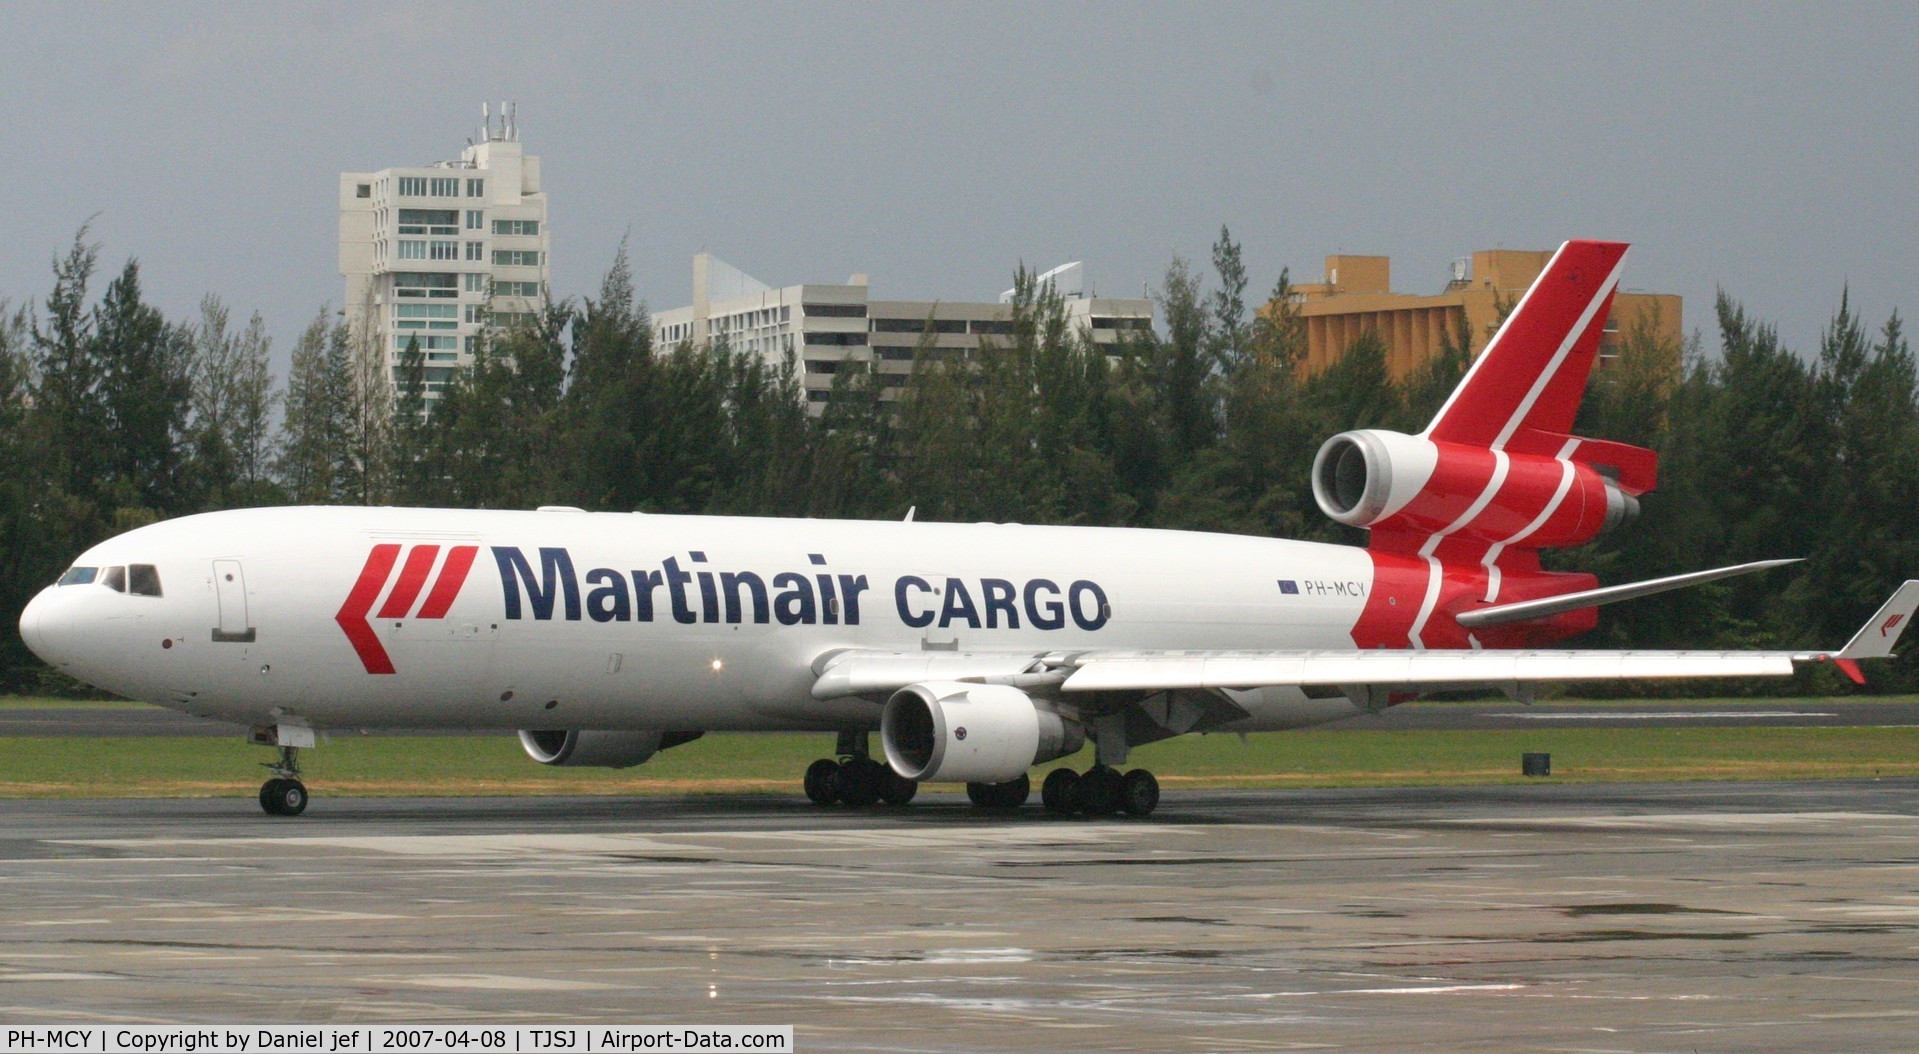 PH-MCY, 1991 McDonnell Douglas MD-11F C/N 48445, Martinair CARGO taxing to the active runway for take off